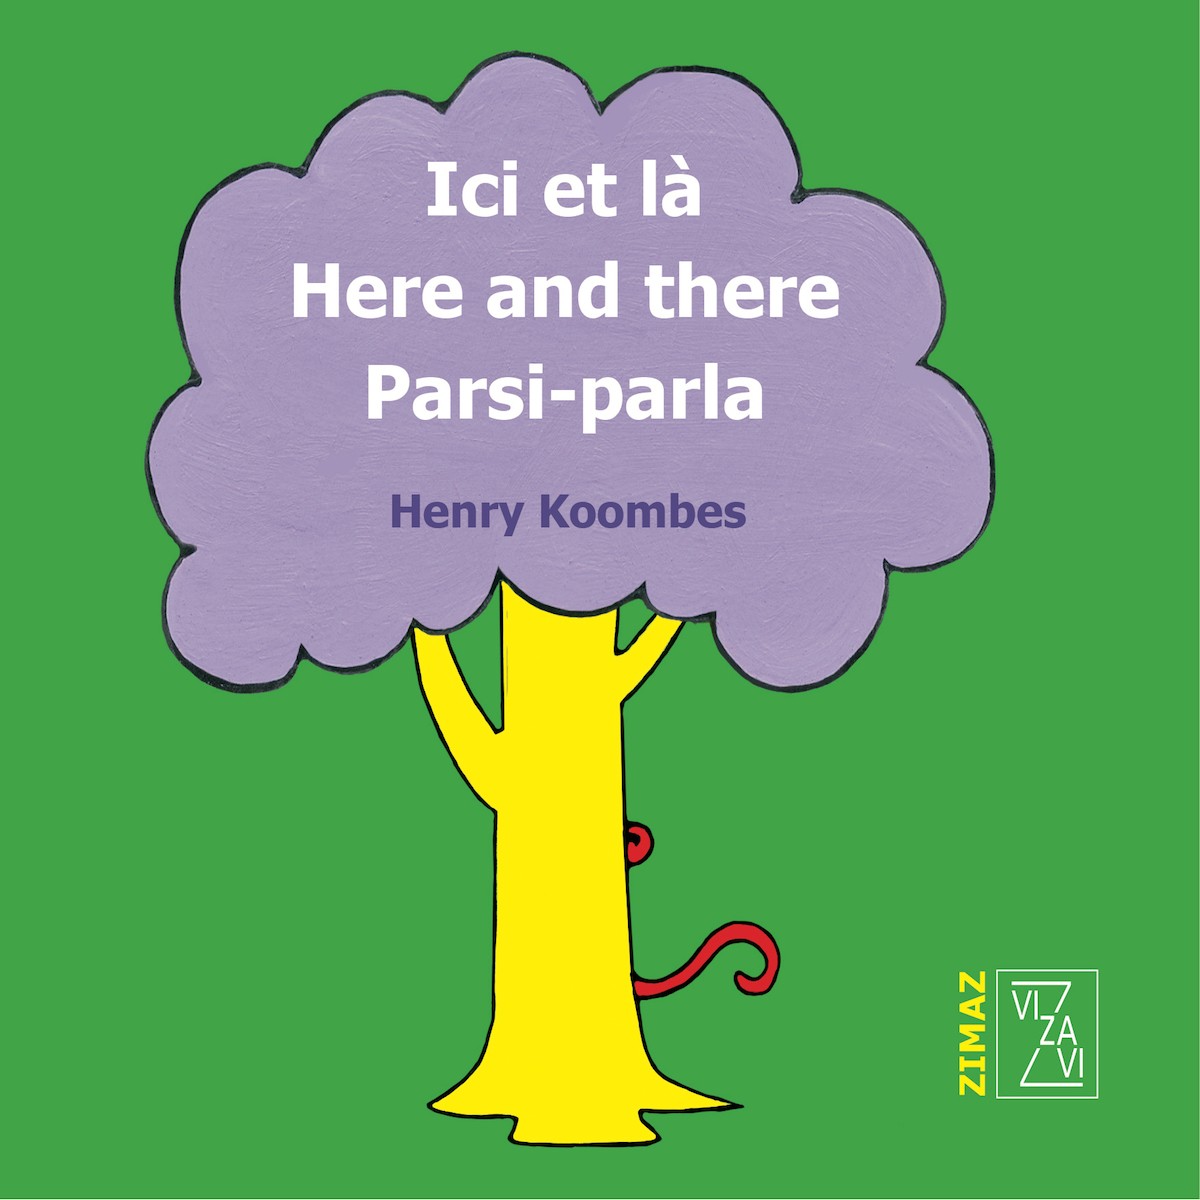 Ici et là - Here and there - Parsi-parla